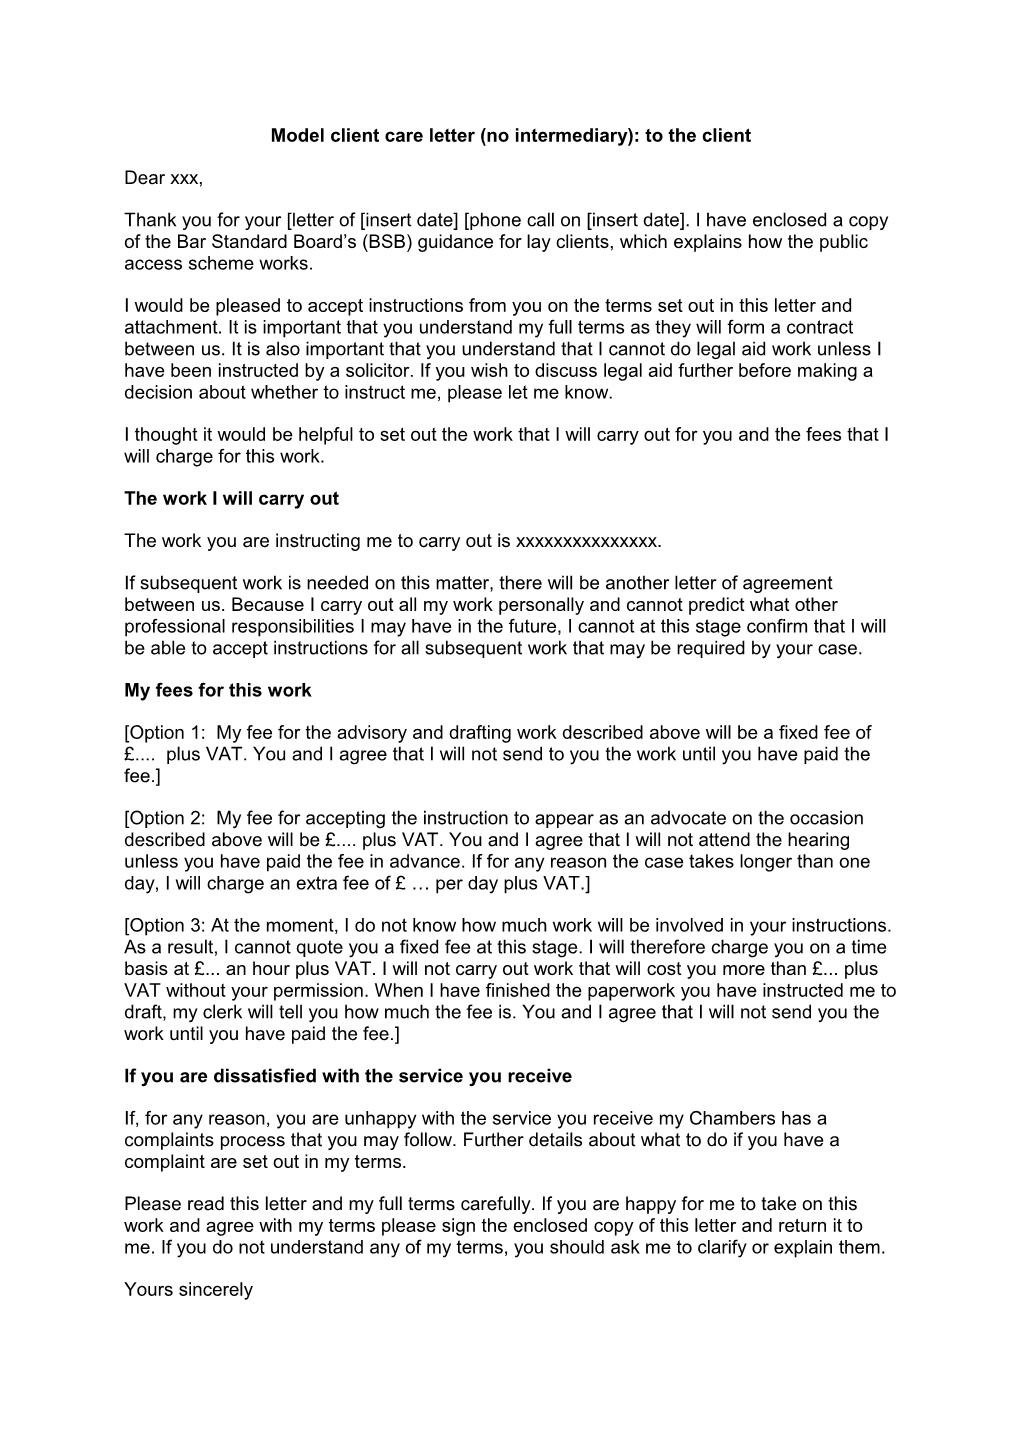 Model Client Care Letter: To The Client